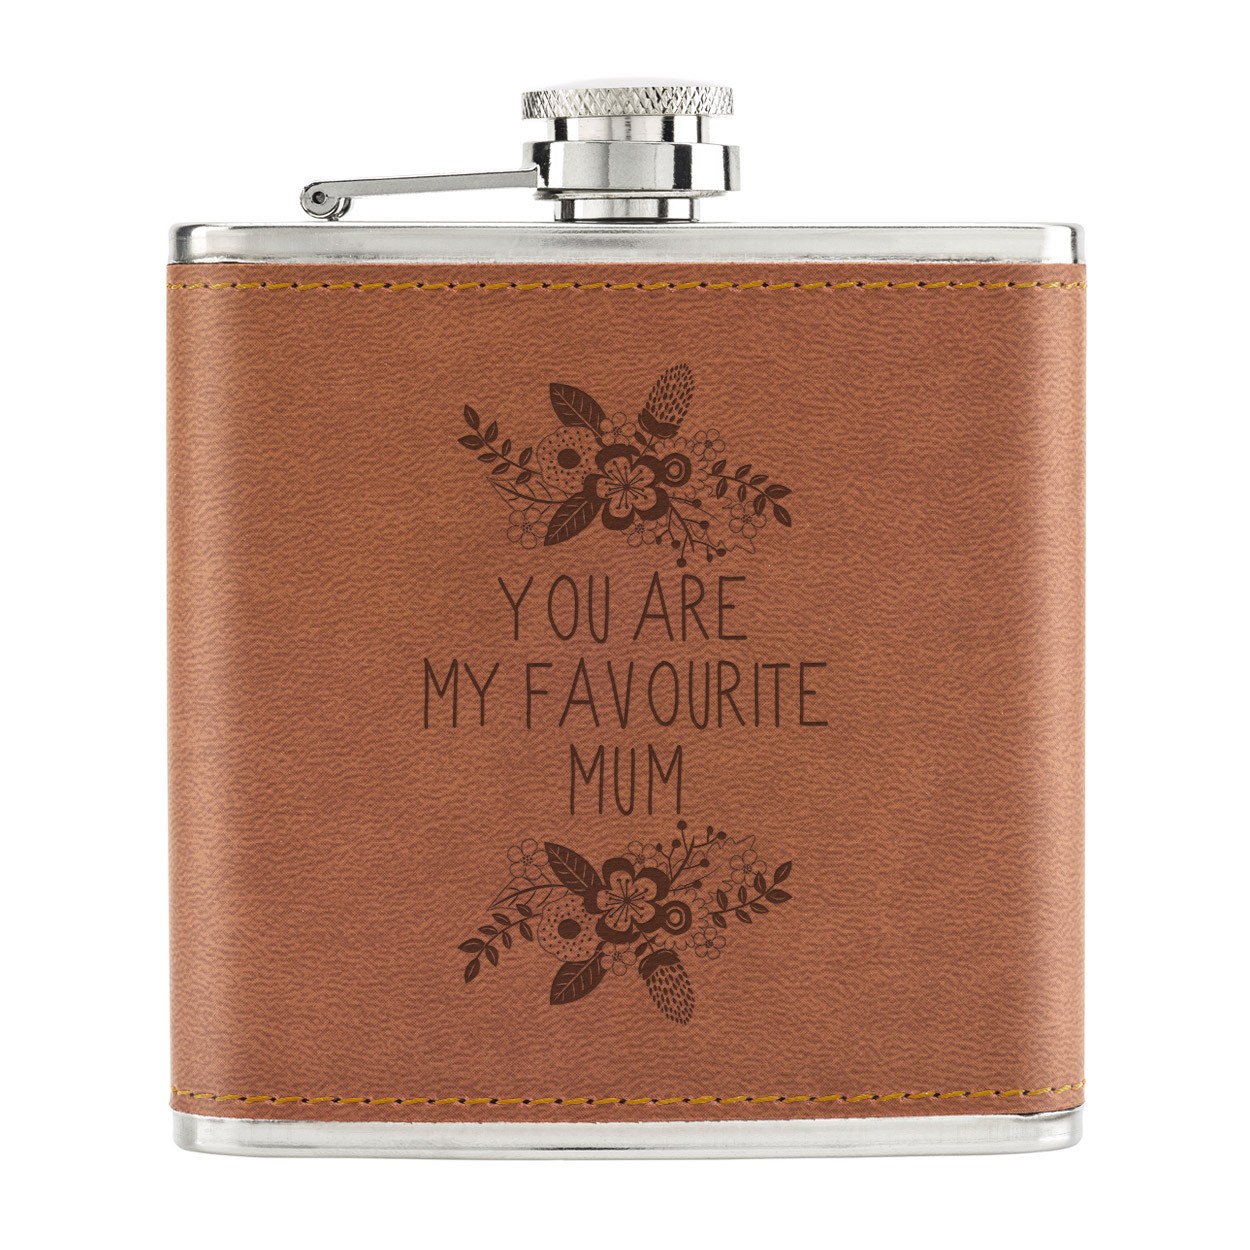 You Are My Favourite Mum 6oz PU Leather Hip Flask Tan